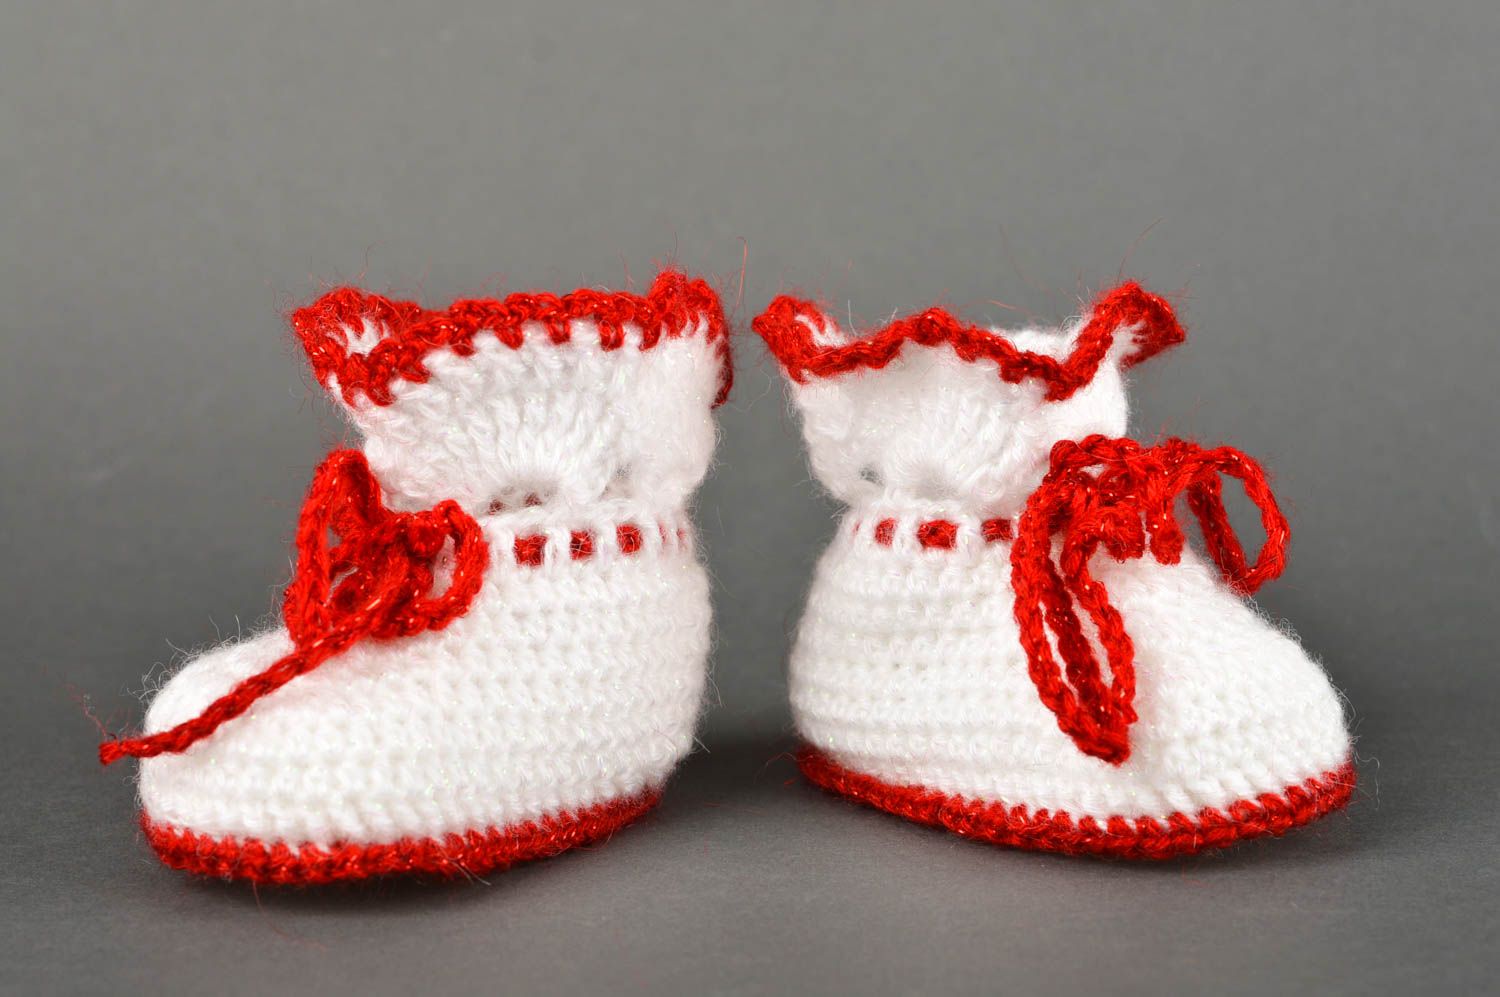 Handmade crochet baby booties crochet ideas baby accessories gifts for kids photo 2